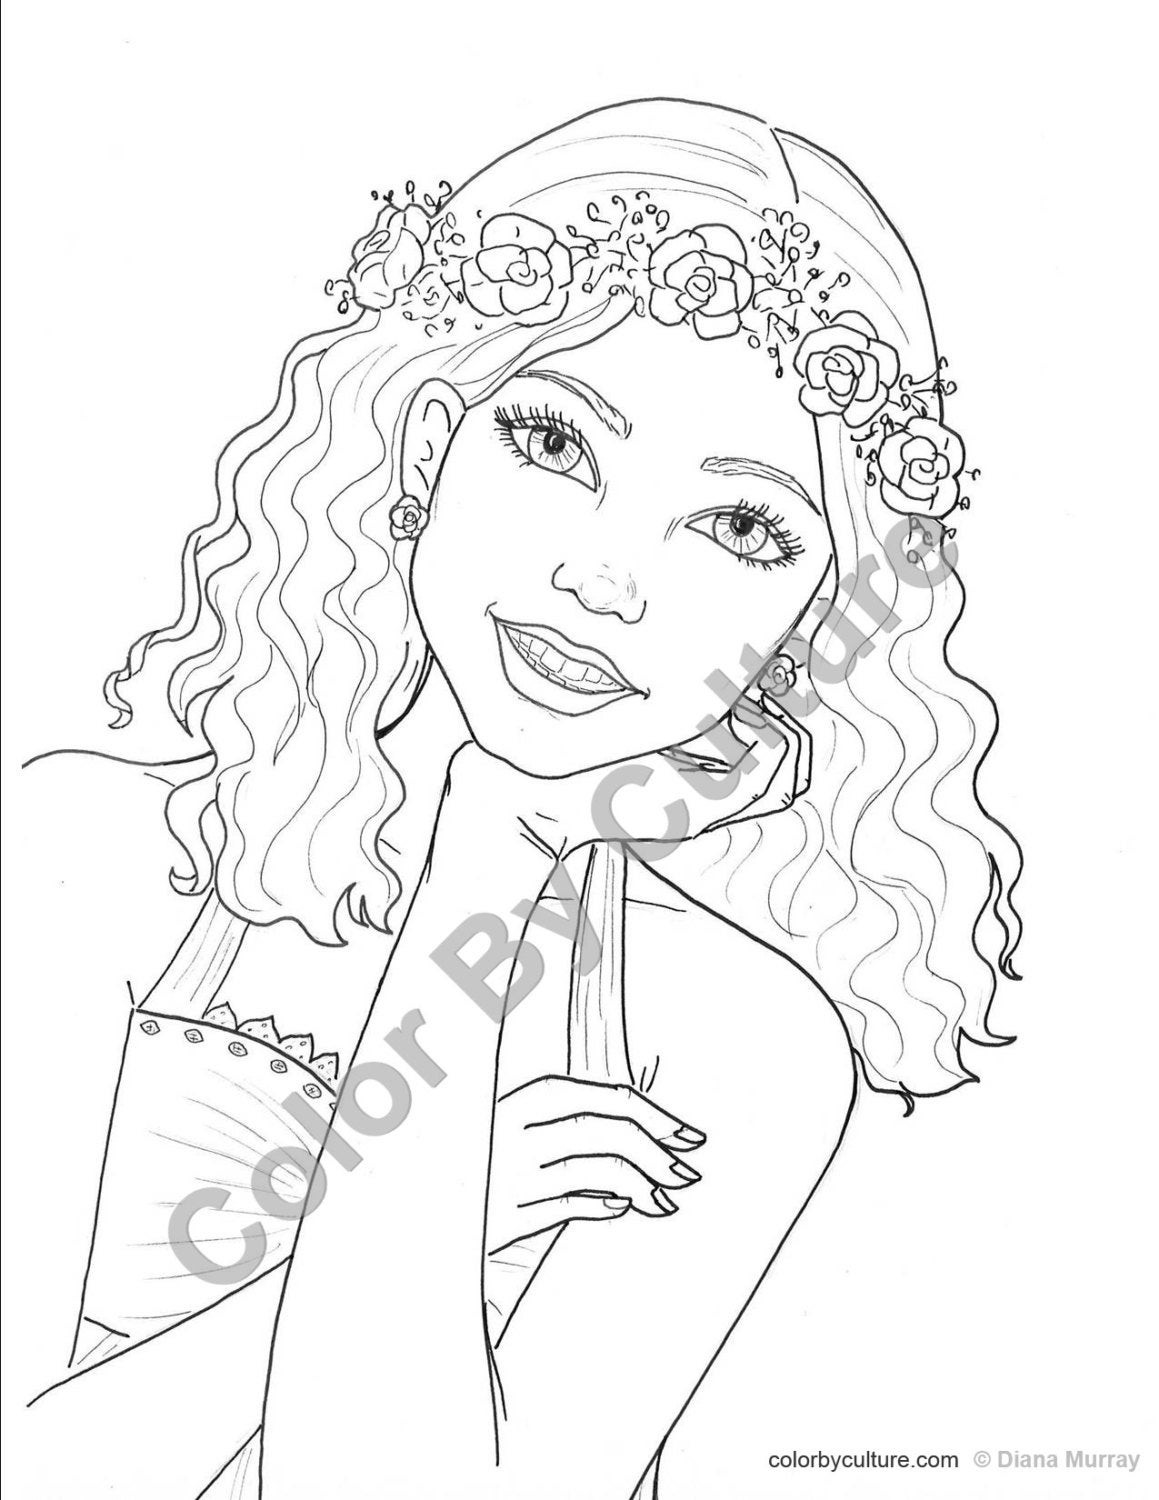 Coloring Pages For Teenage Girls
 Fashion Coloring Page Girl with Flower Wreath Coloring Page